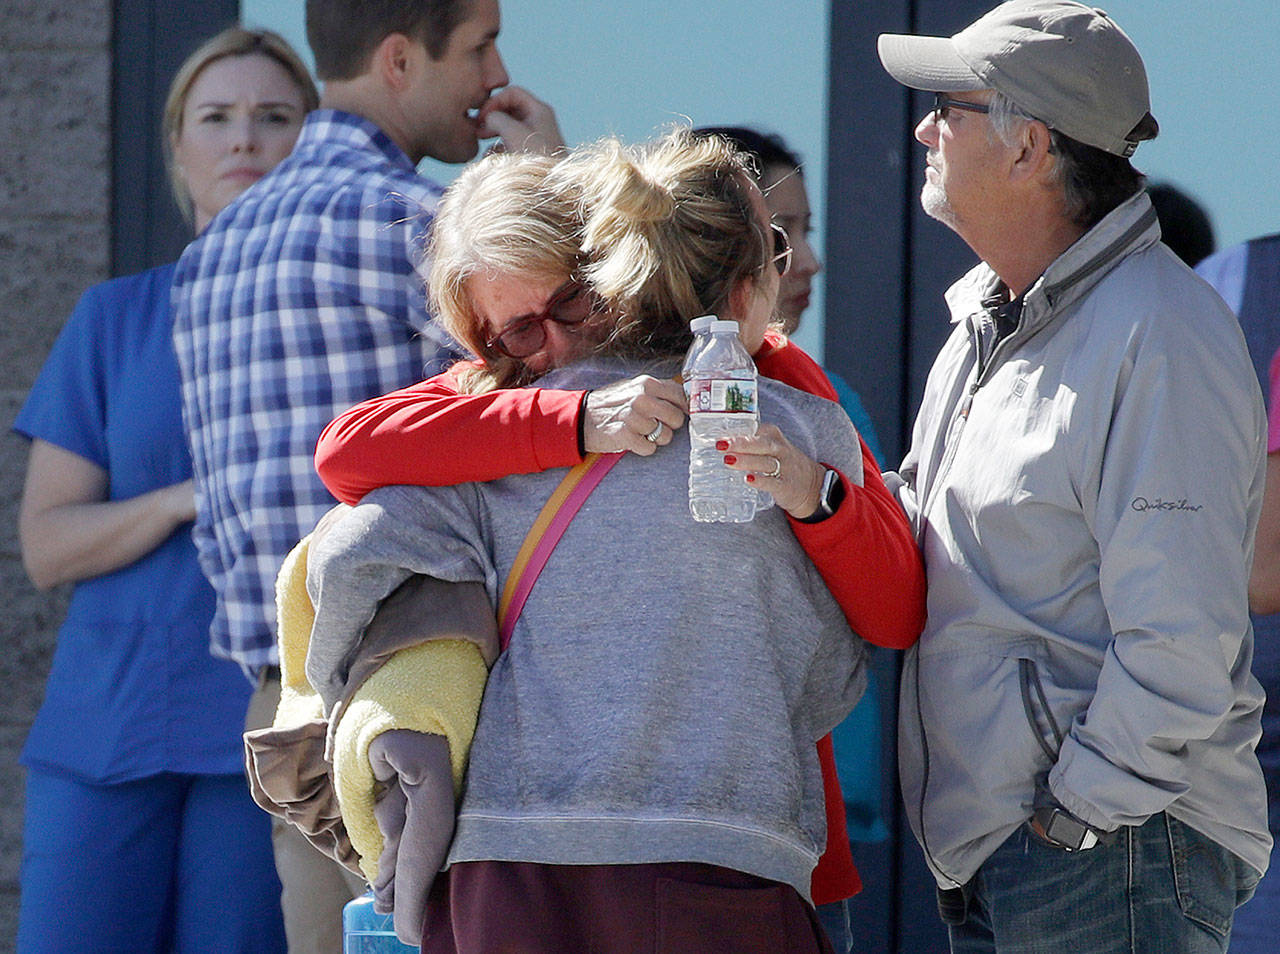 Two women embrace outside of a family assistance center Monday in Las Vegas. The makeshift center was set up to help families and others reconnect after the mass shooting on the Las Vegas Strip. (John Locher/The Associated Press)